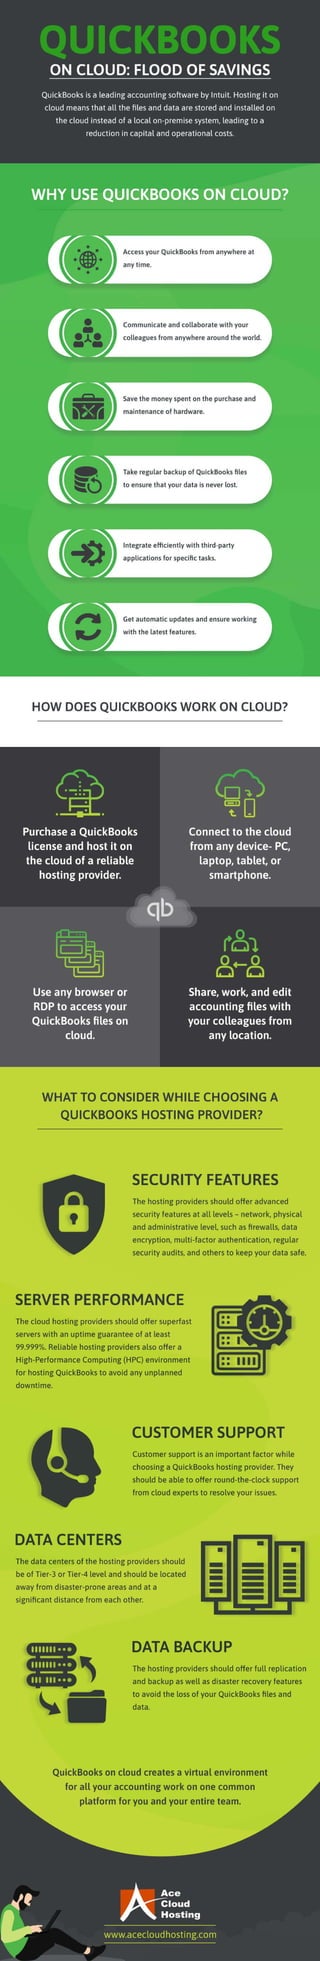 Flood Of Saving: QuickBooks On The Cloud [Infographic]